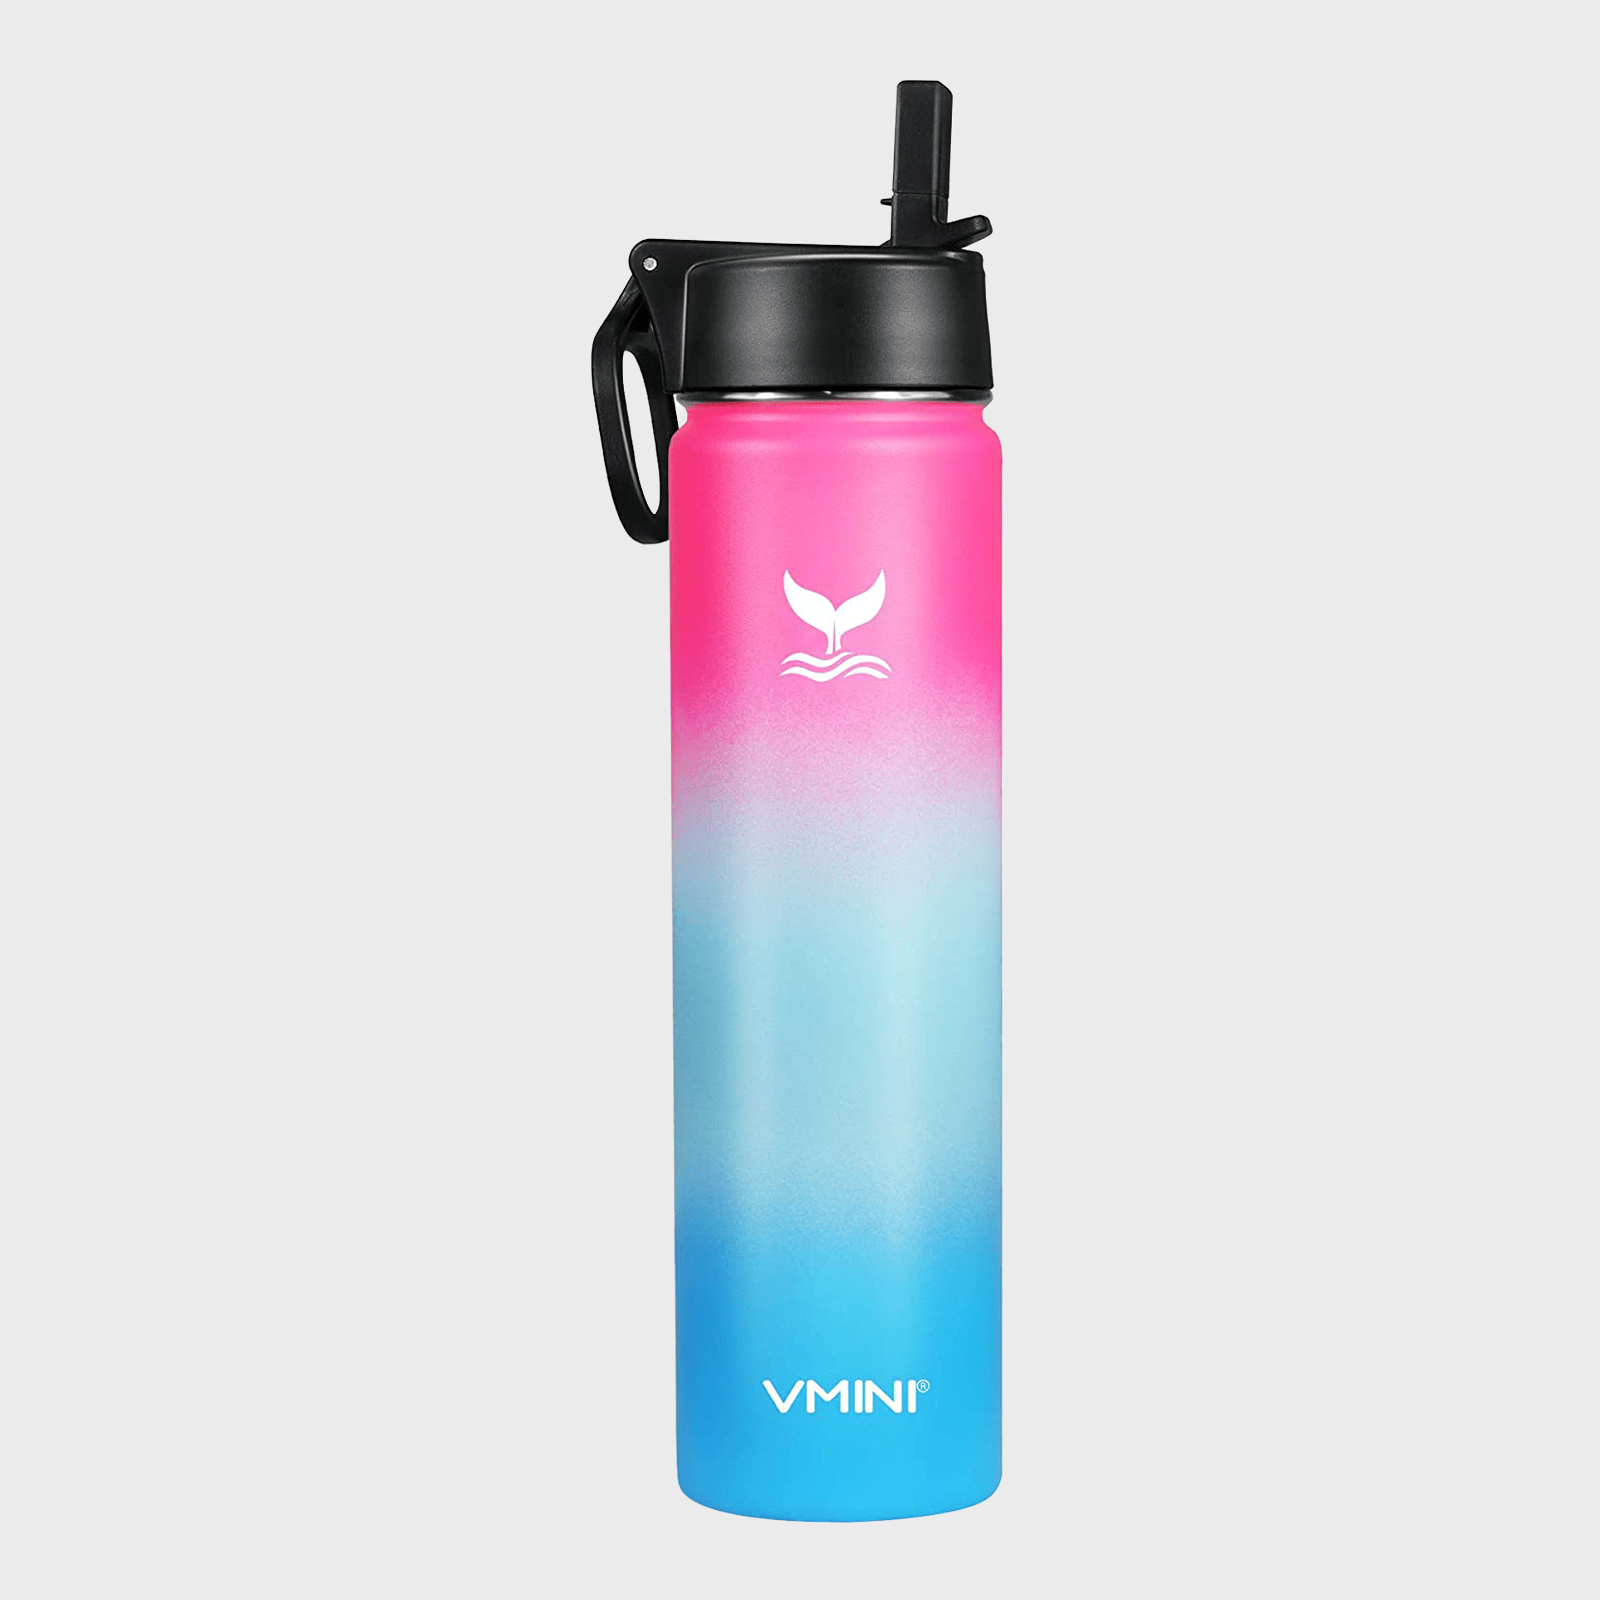 https://www.rd.com/wp-content/uploads/2022/05/vmini-water-bottle-with-straw-ecomm-via-amazon.png?fit=700%2C700